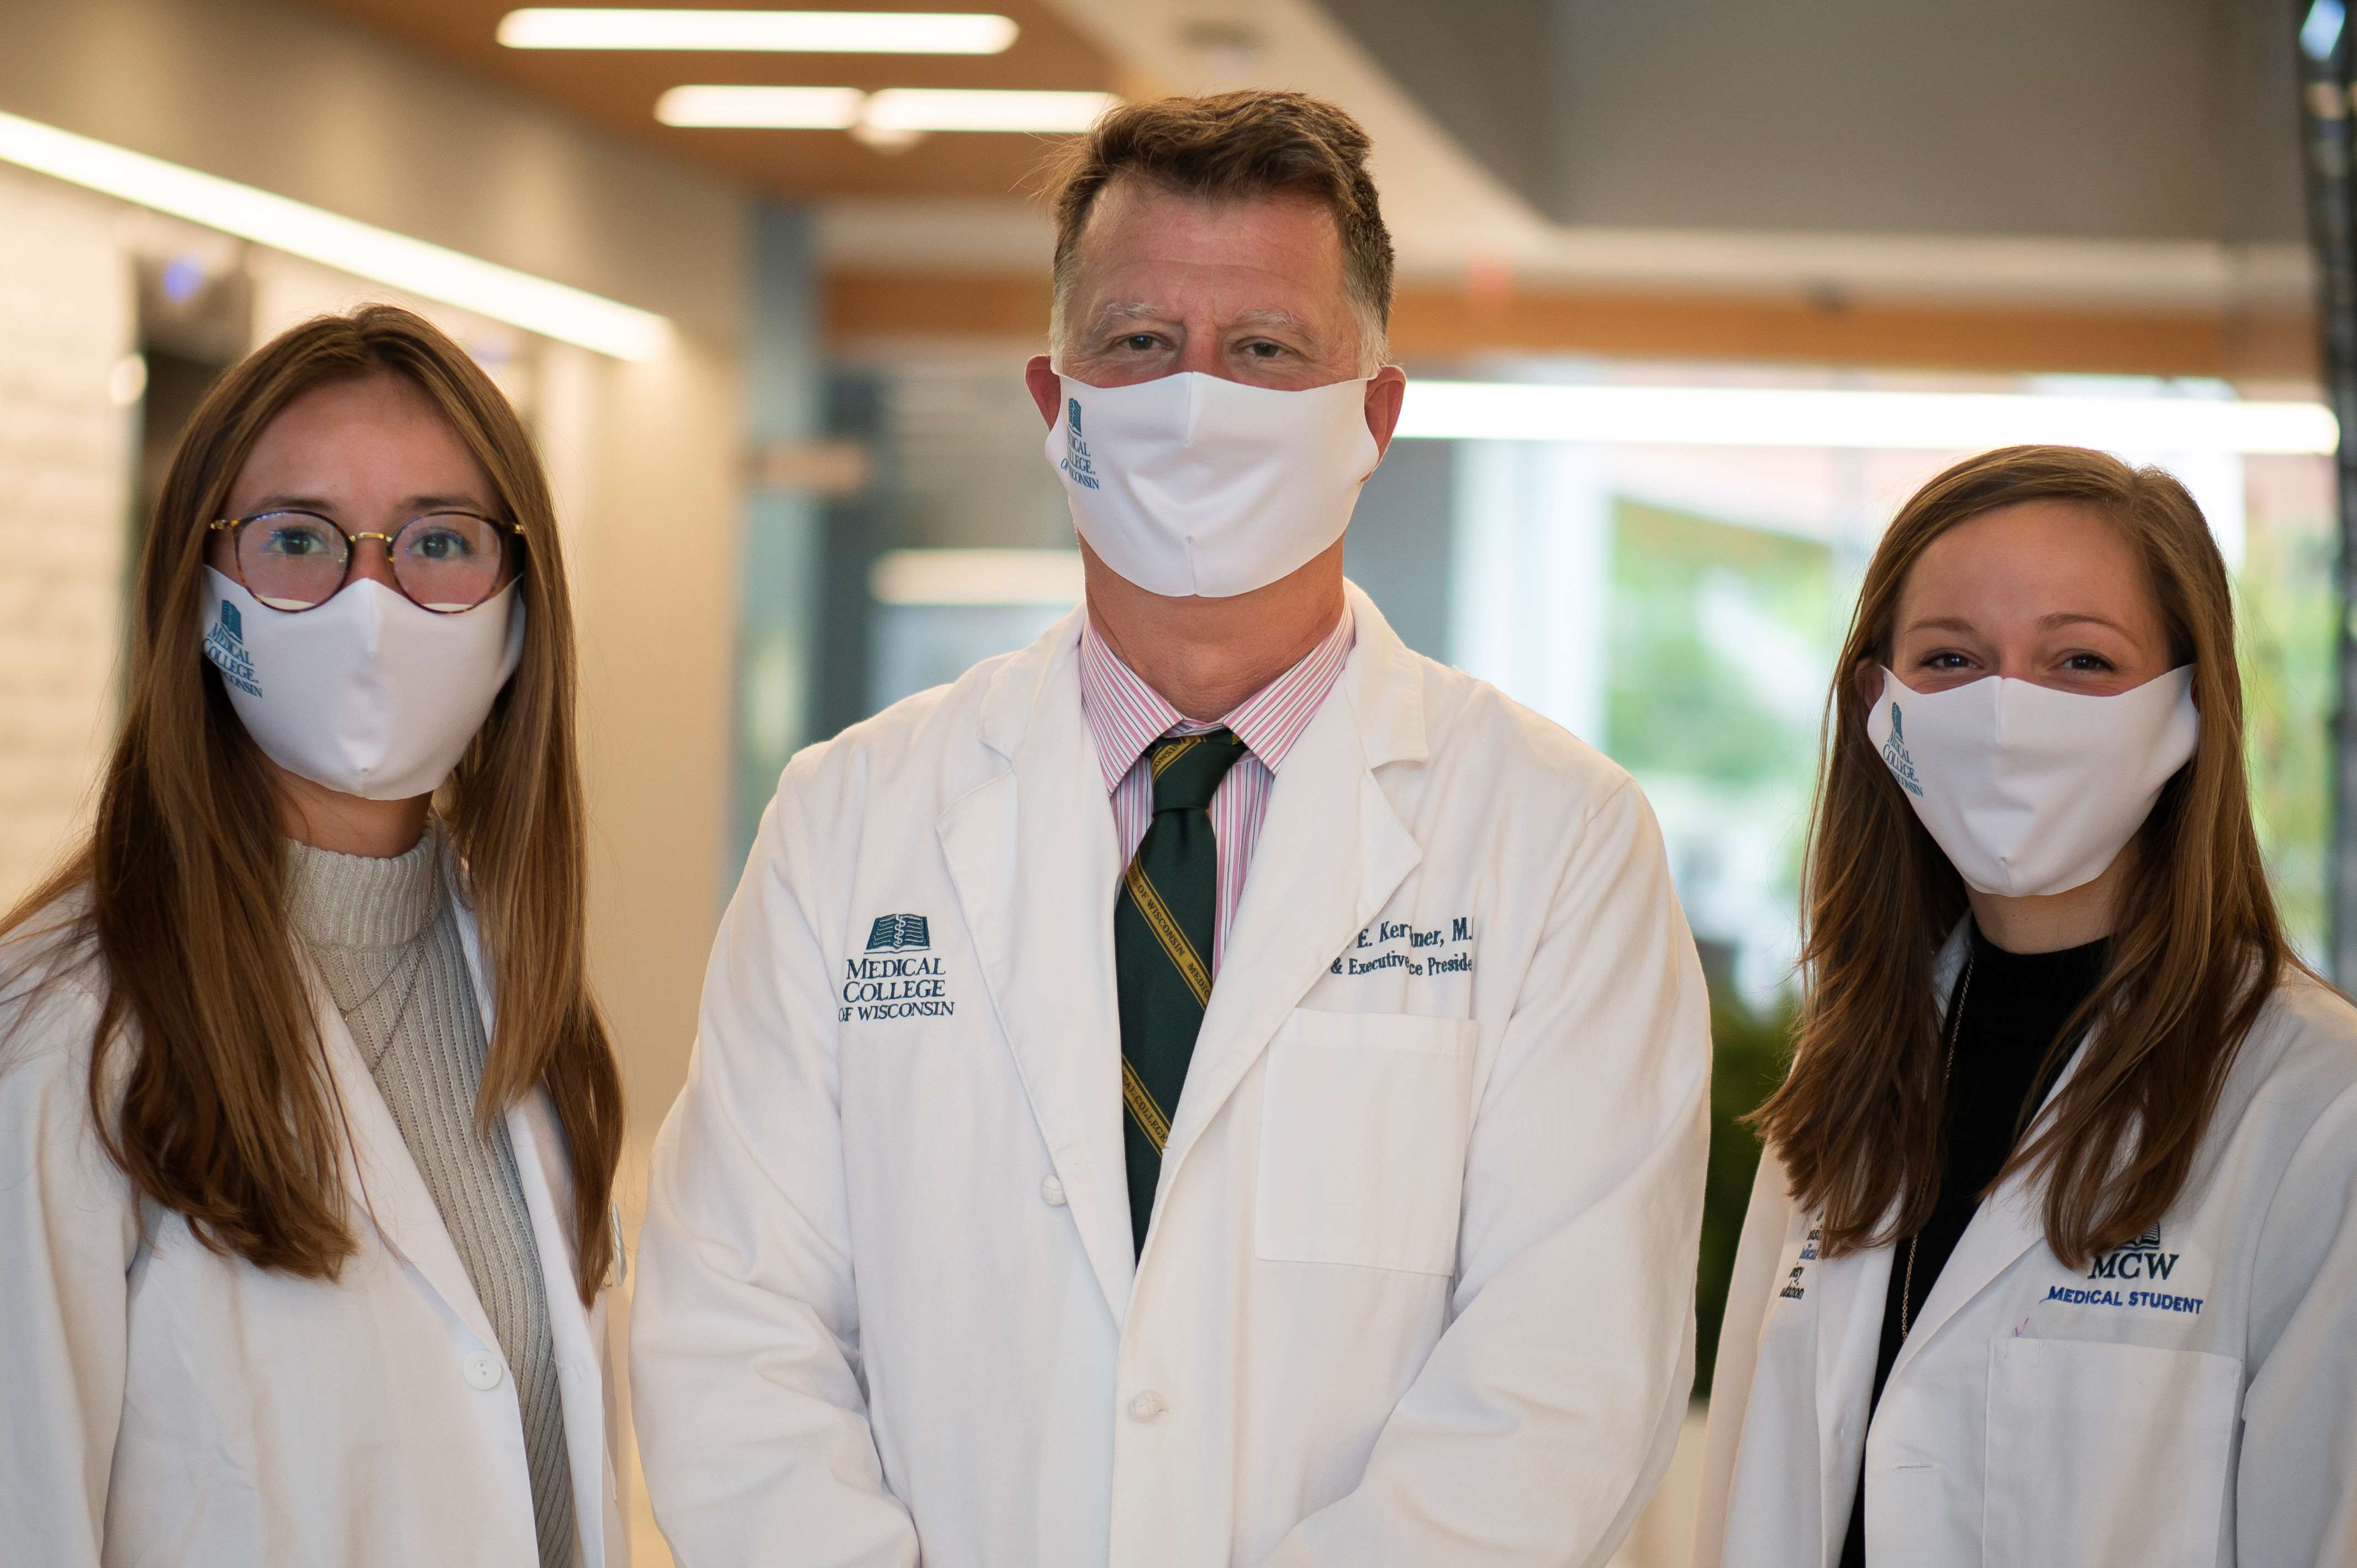 Dr. Joseph Kerschner and his daughters, MCW medical students